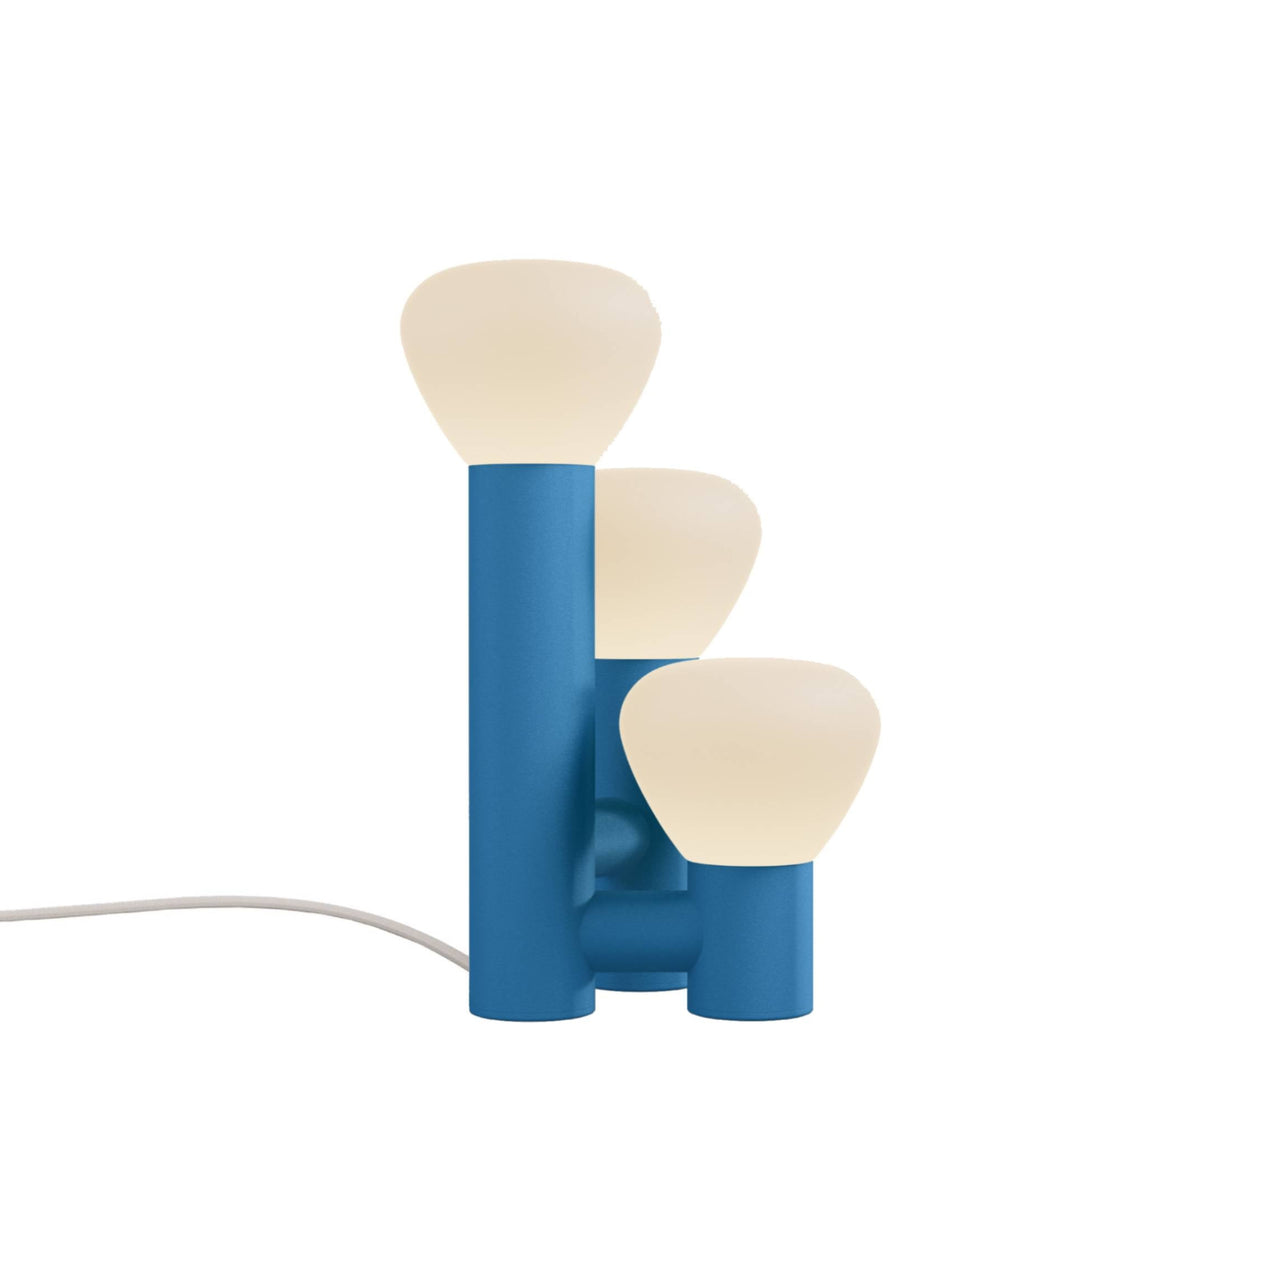 Parc 06 Table Lamp: Footswitch +  Blue + Beige